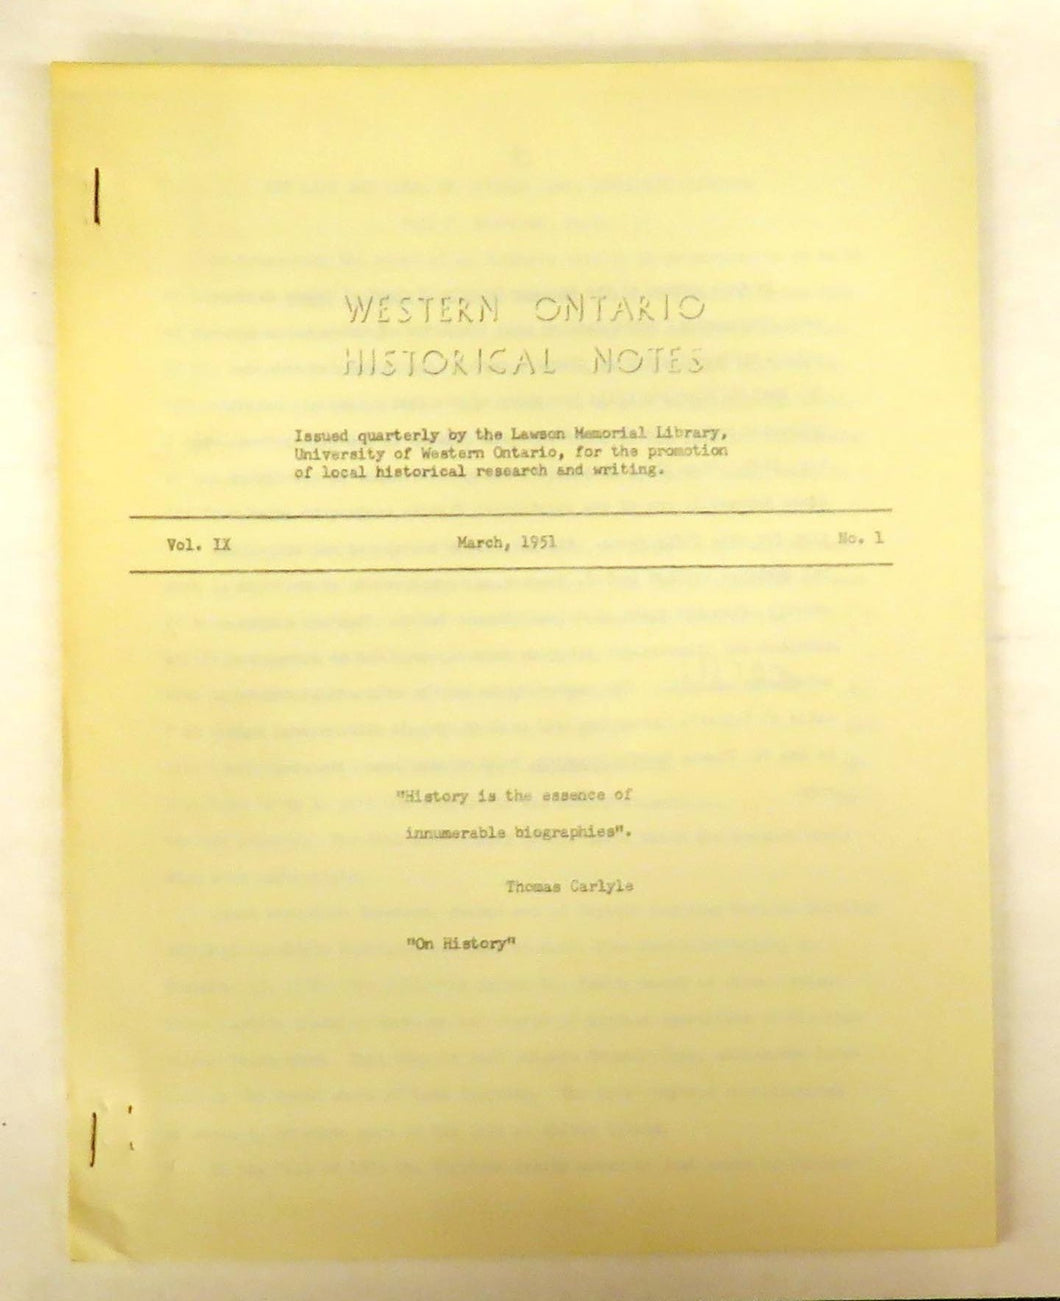 Western Ontario Historical Notes March 1951